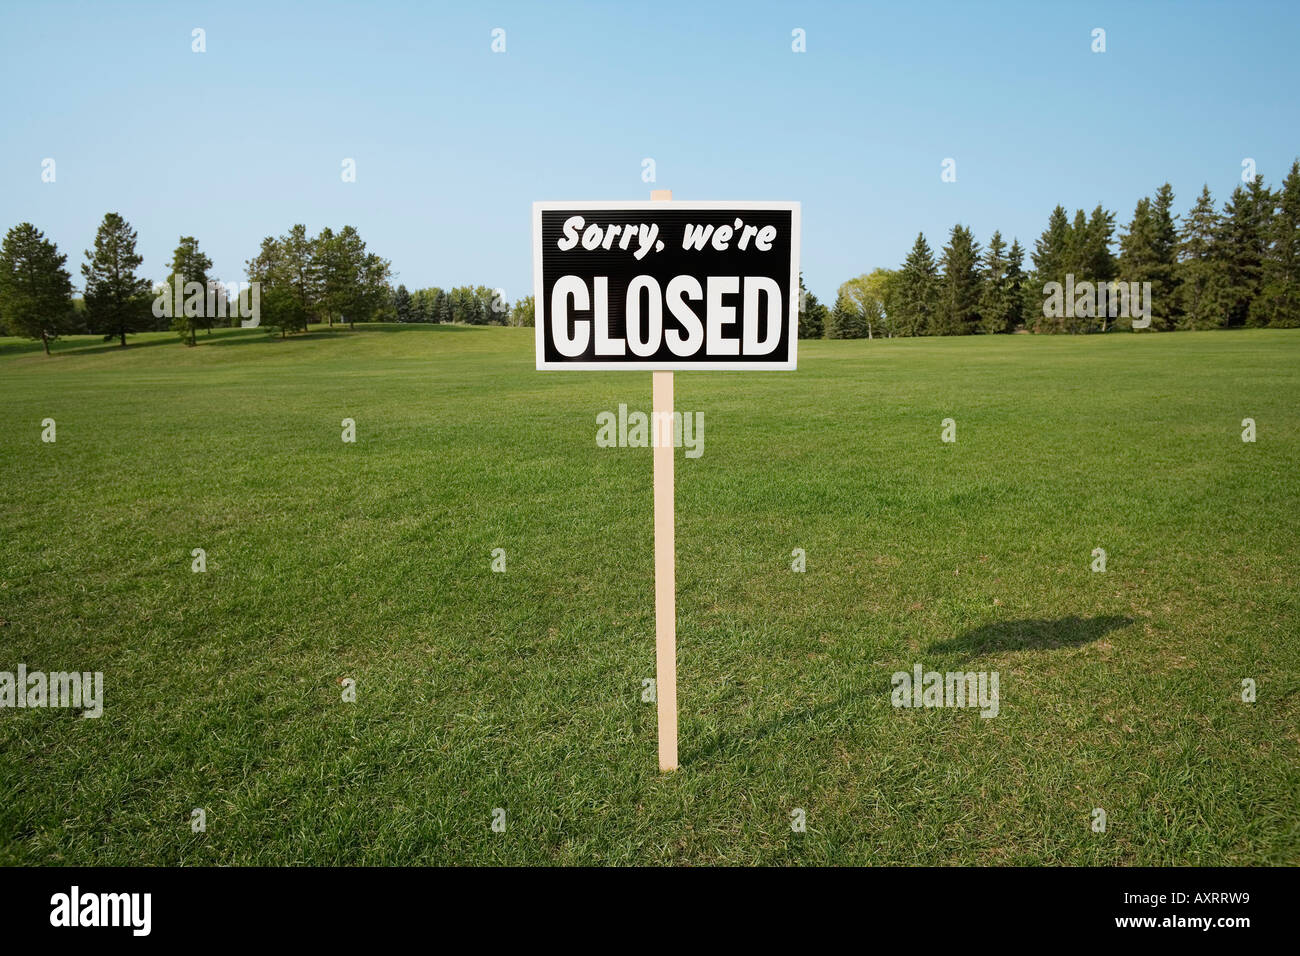 Closed sign outside in field Stock Photo